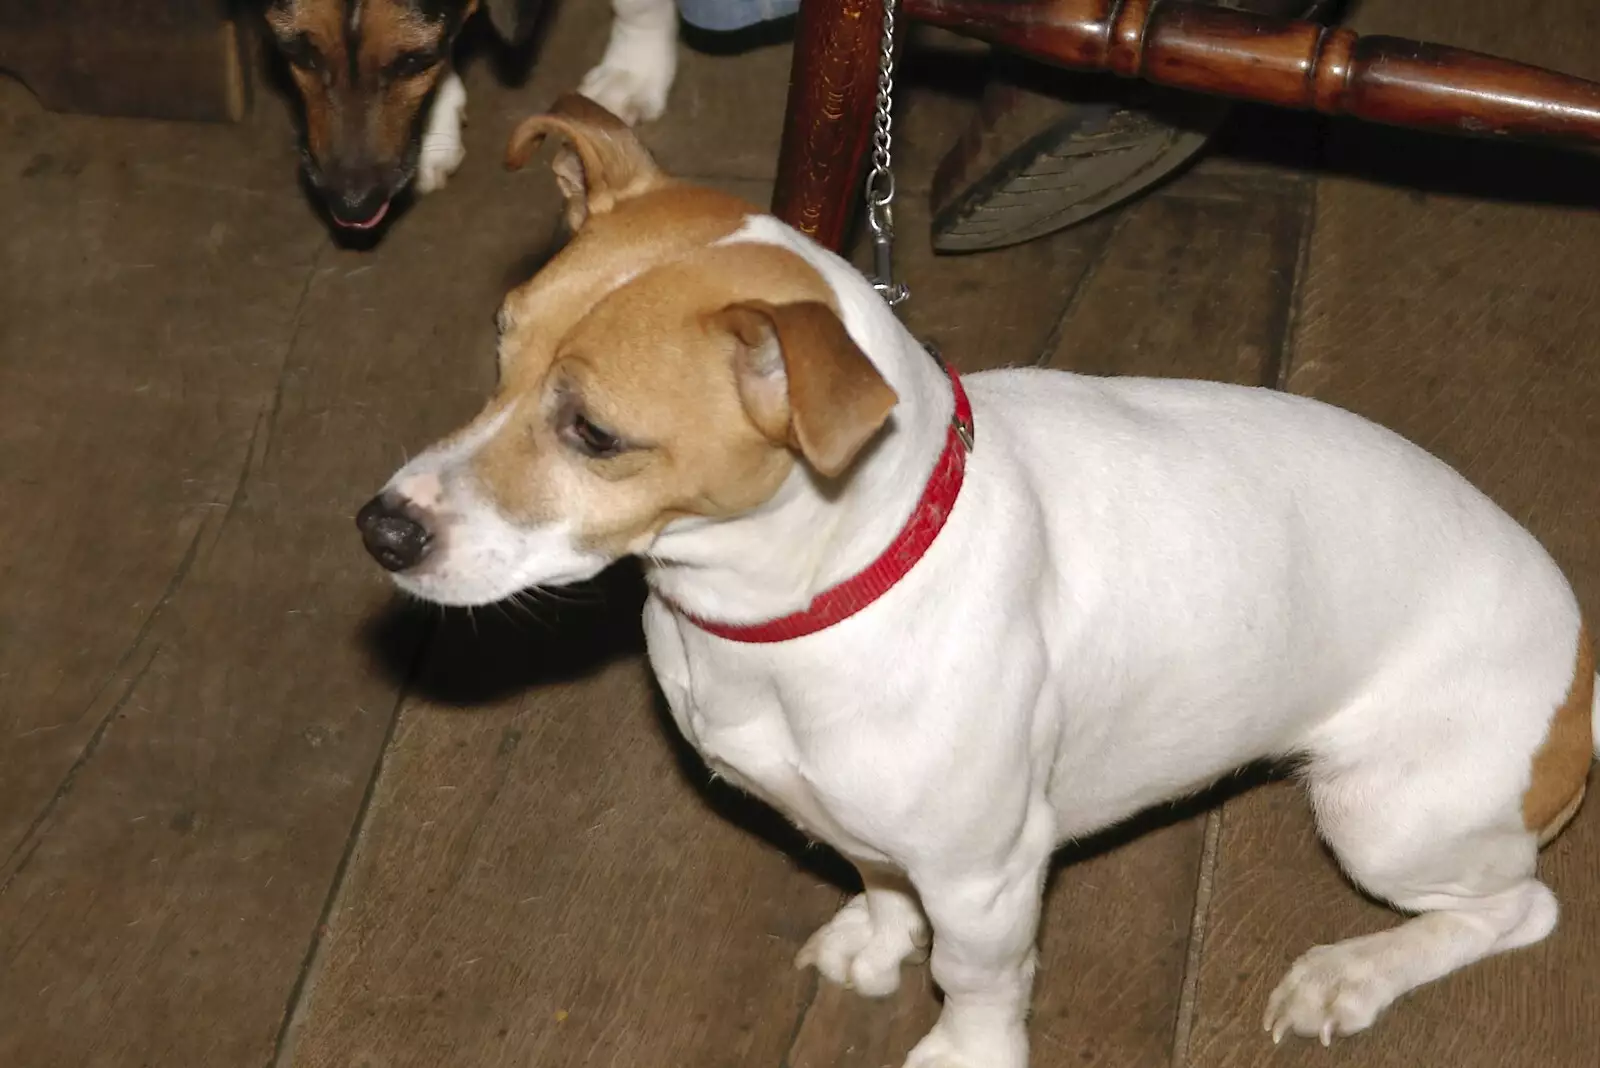 A small dog at the bar, from Boxing Day Rambles, Hoxne and Oakley, Suffolk - 26th December 2004